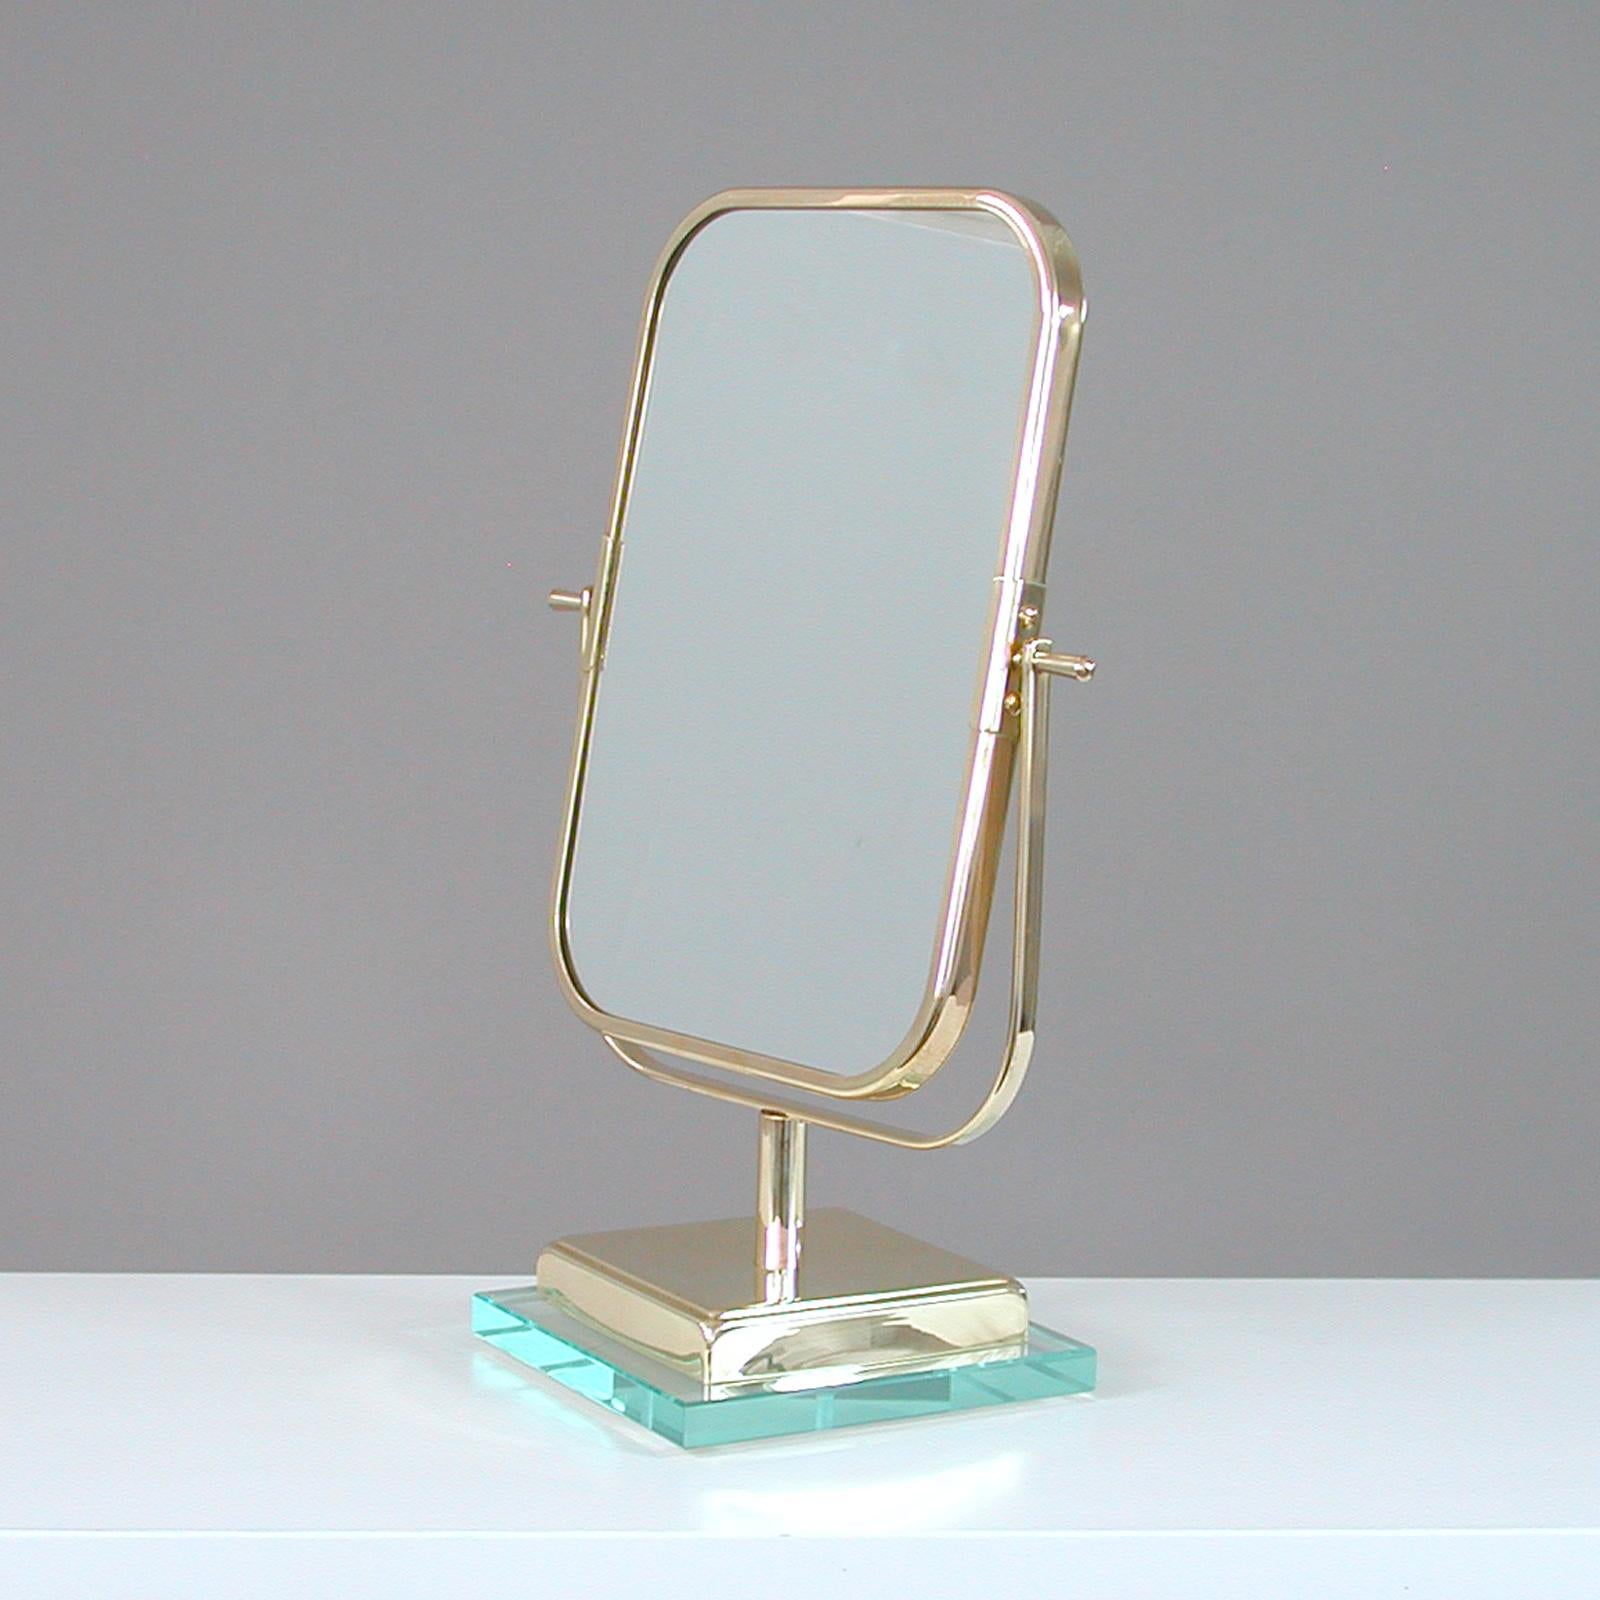 This unusual vanity mirror was designed and manufactured in Italy in the 1950s in the Style of designer Gio Ponti for Fontana Arte.

The mirror features a thick polished glass base and brass frame. The mirror is adjustable with one rectangular